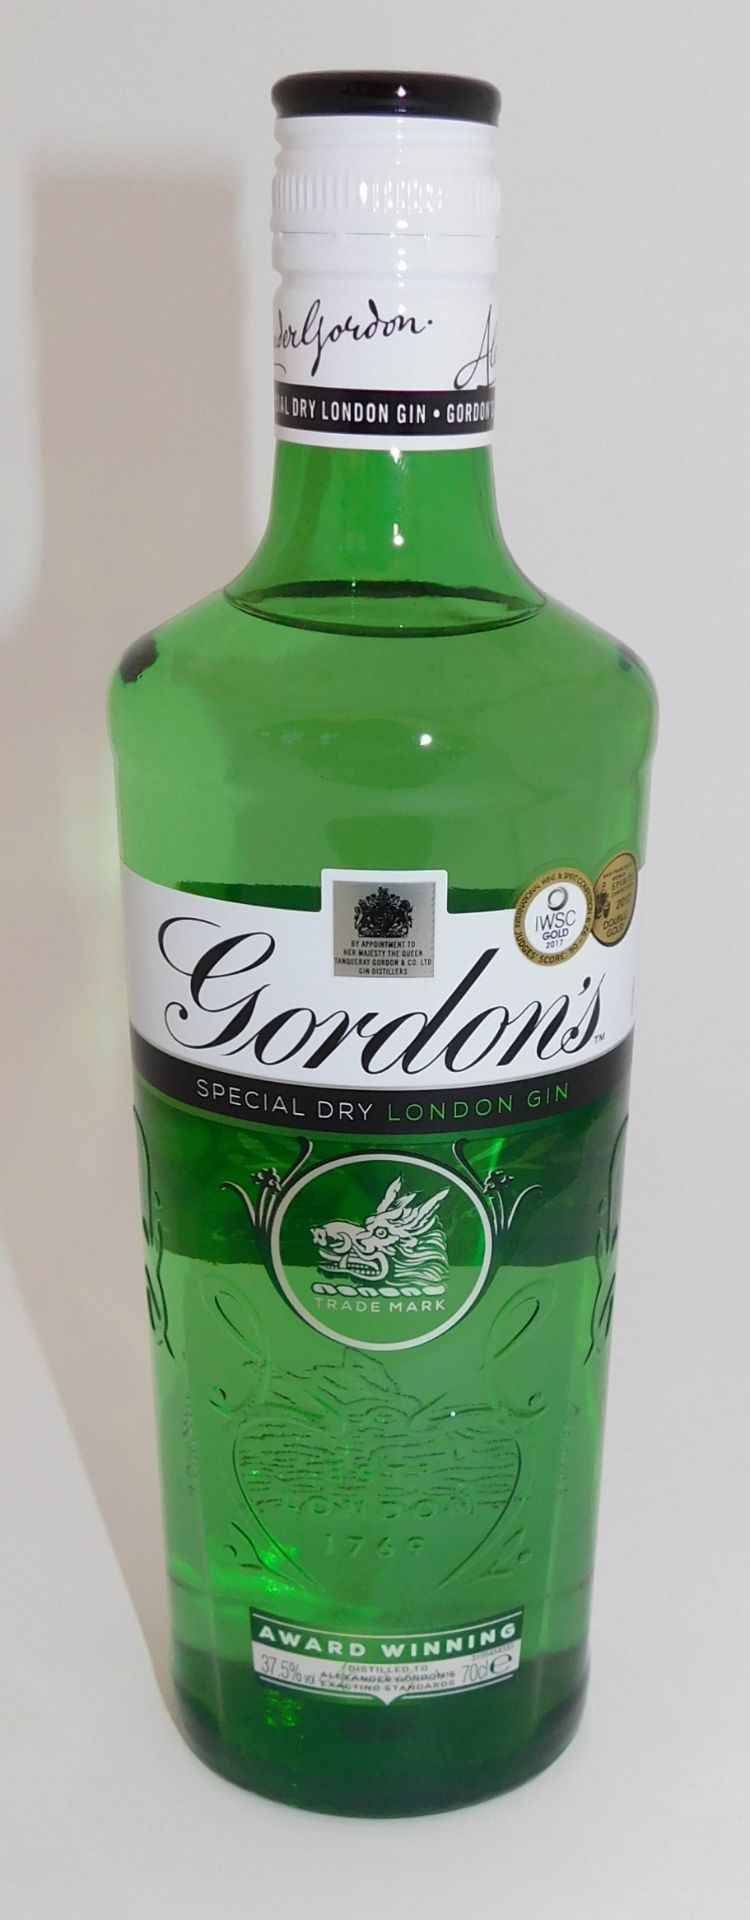 12 Bottles of Gordon’s London Dry Gin, 70cl (Located Stockport – See General Notes for More